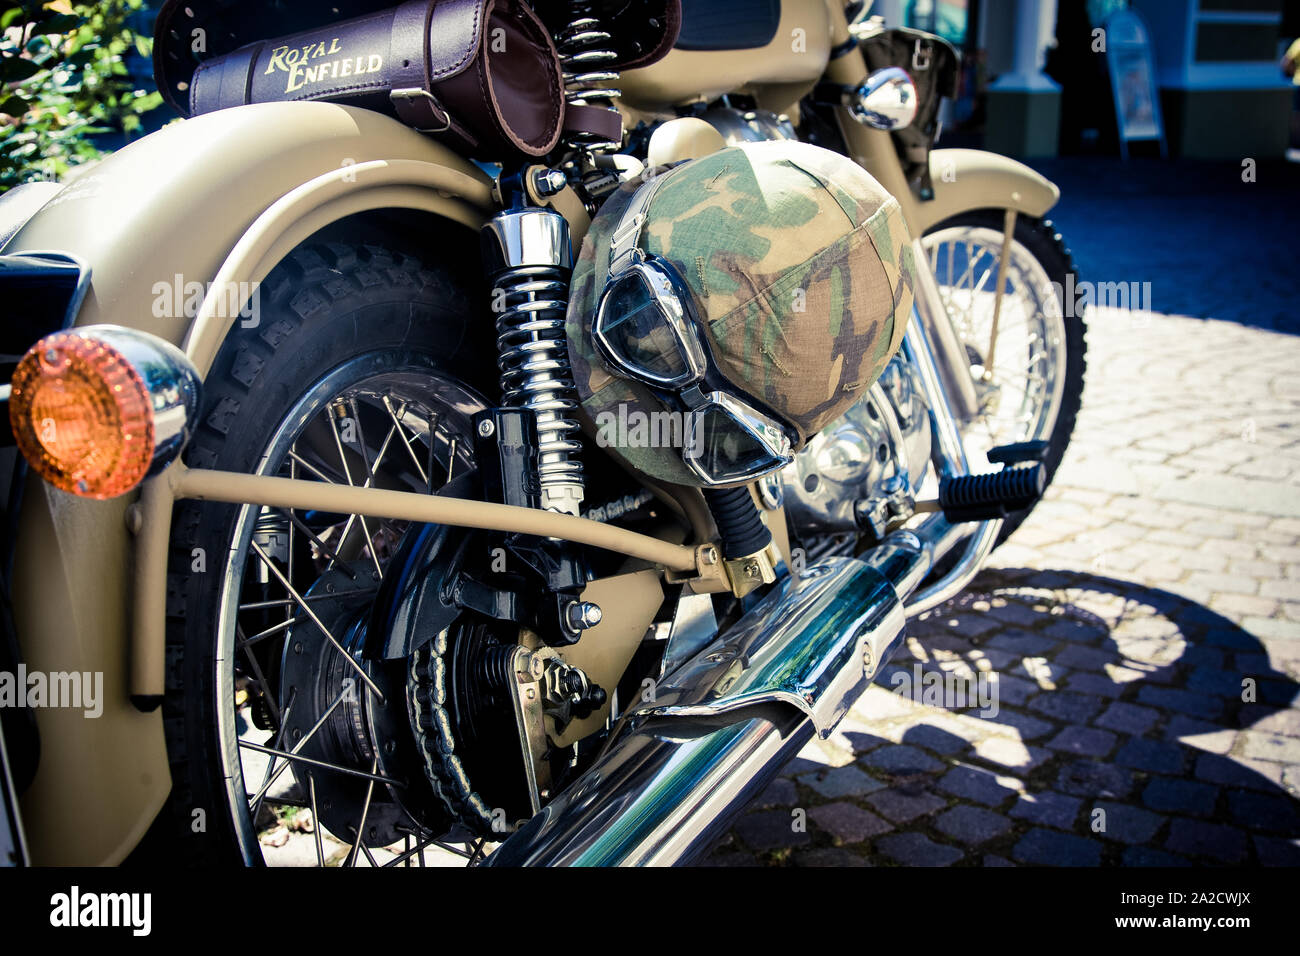 old vintage motorcycle with military helmet Stock Photo